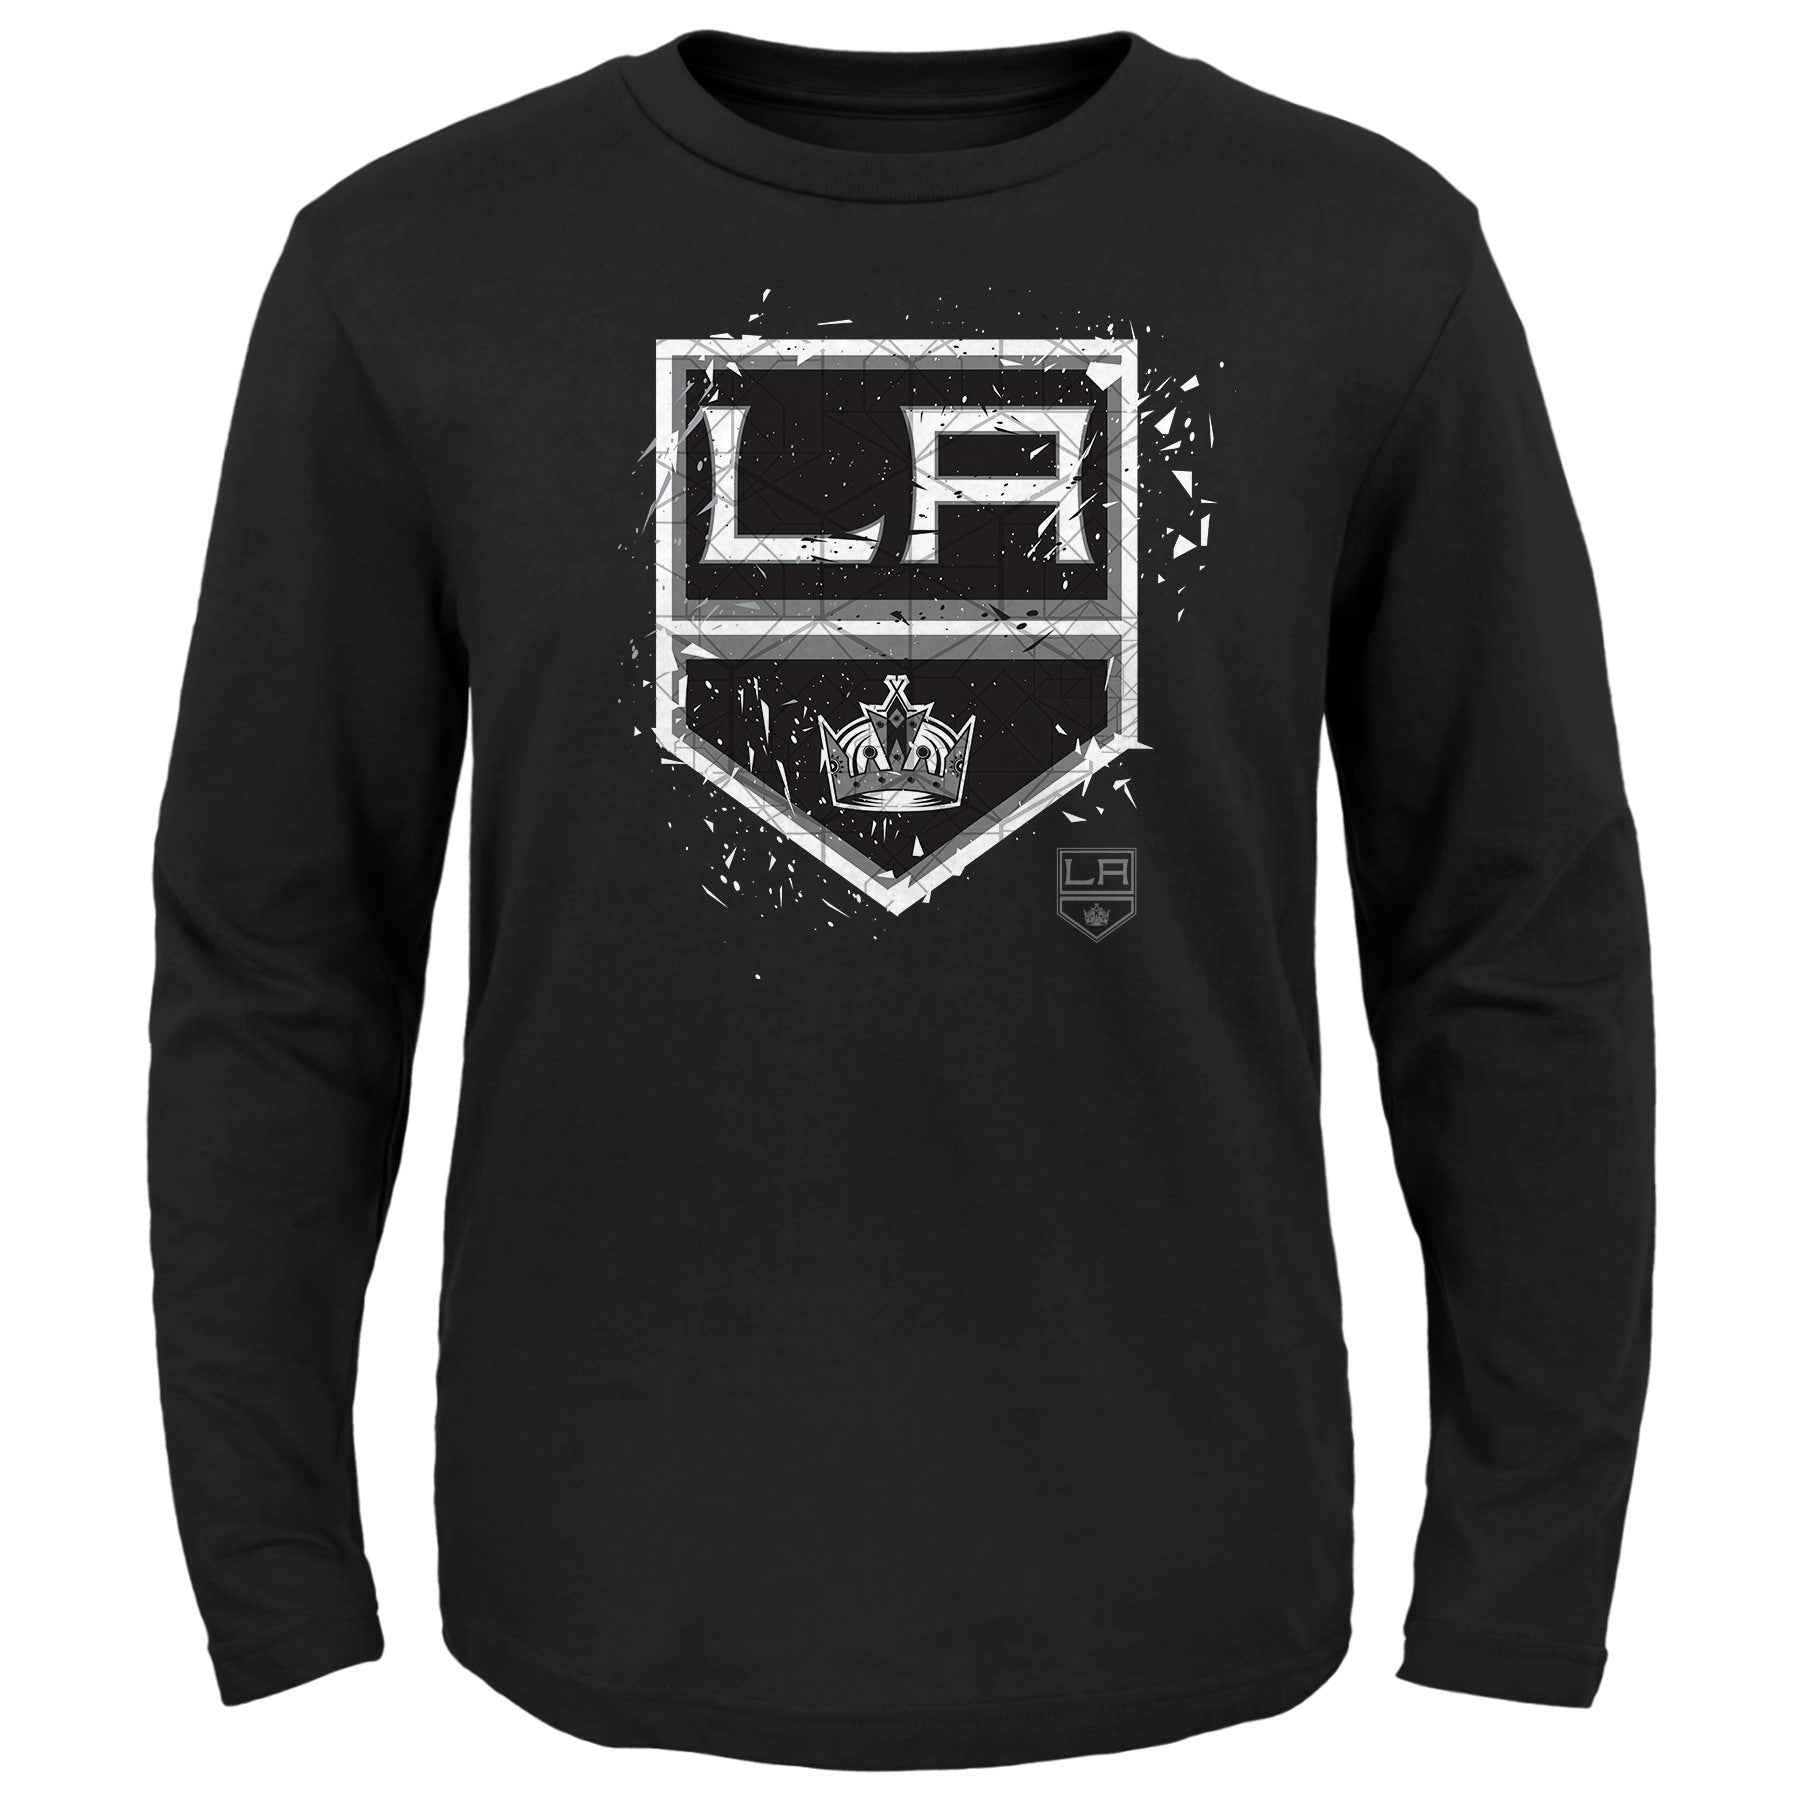 Outerstuff NHL Youth Boys Sacramento Kings Deconstructed Long Sleeve Tee